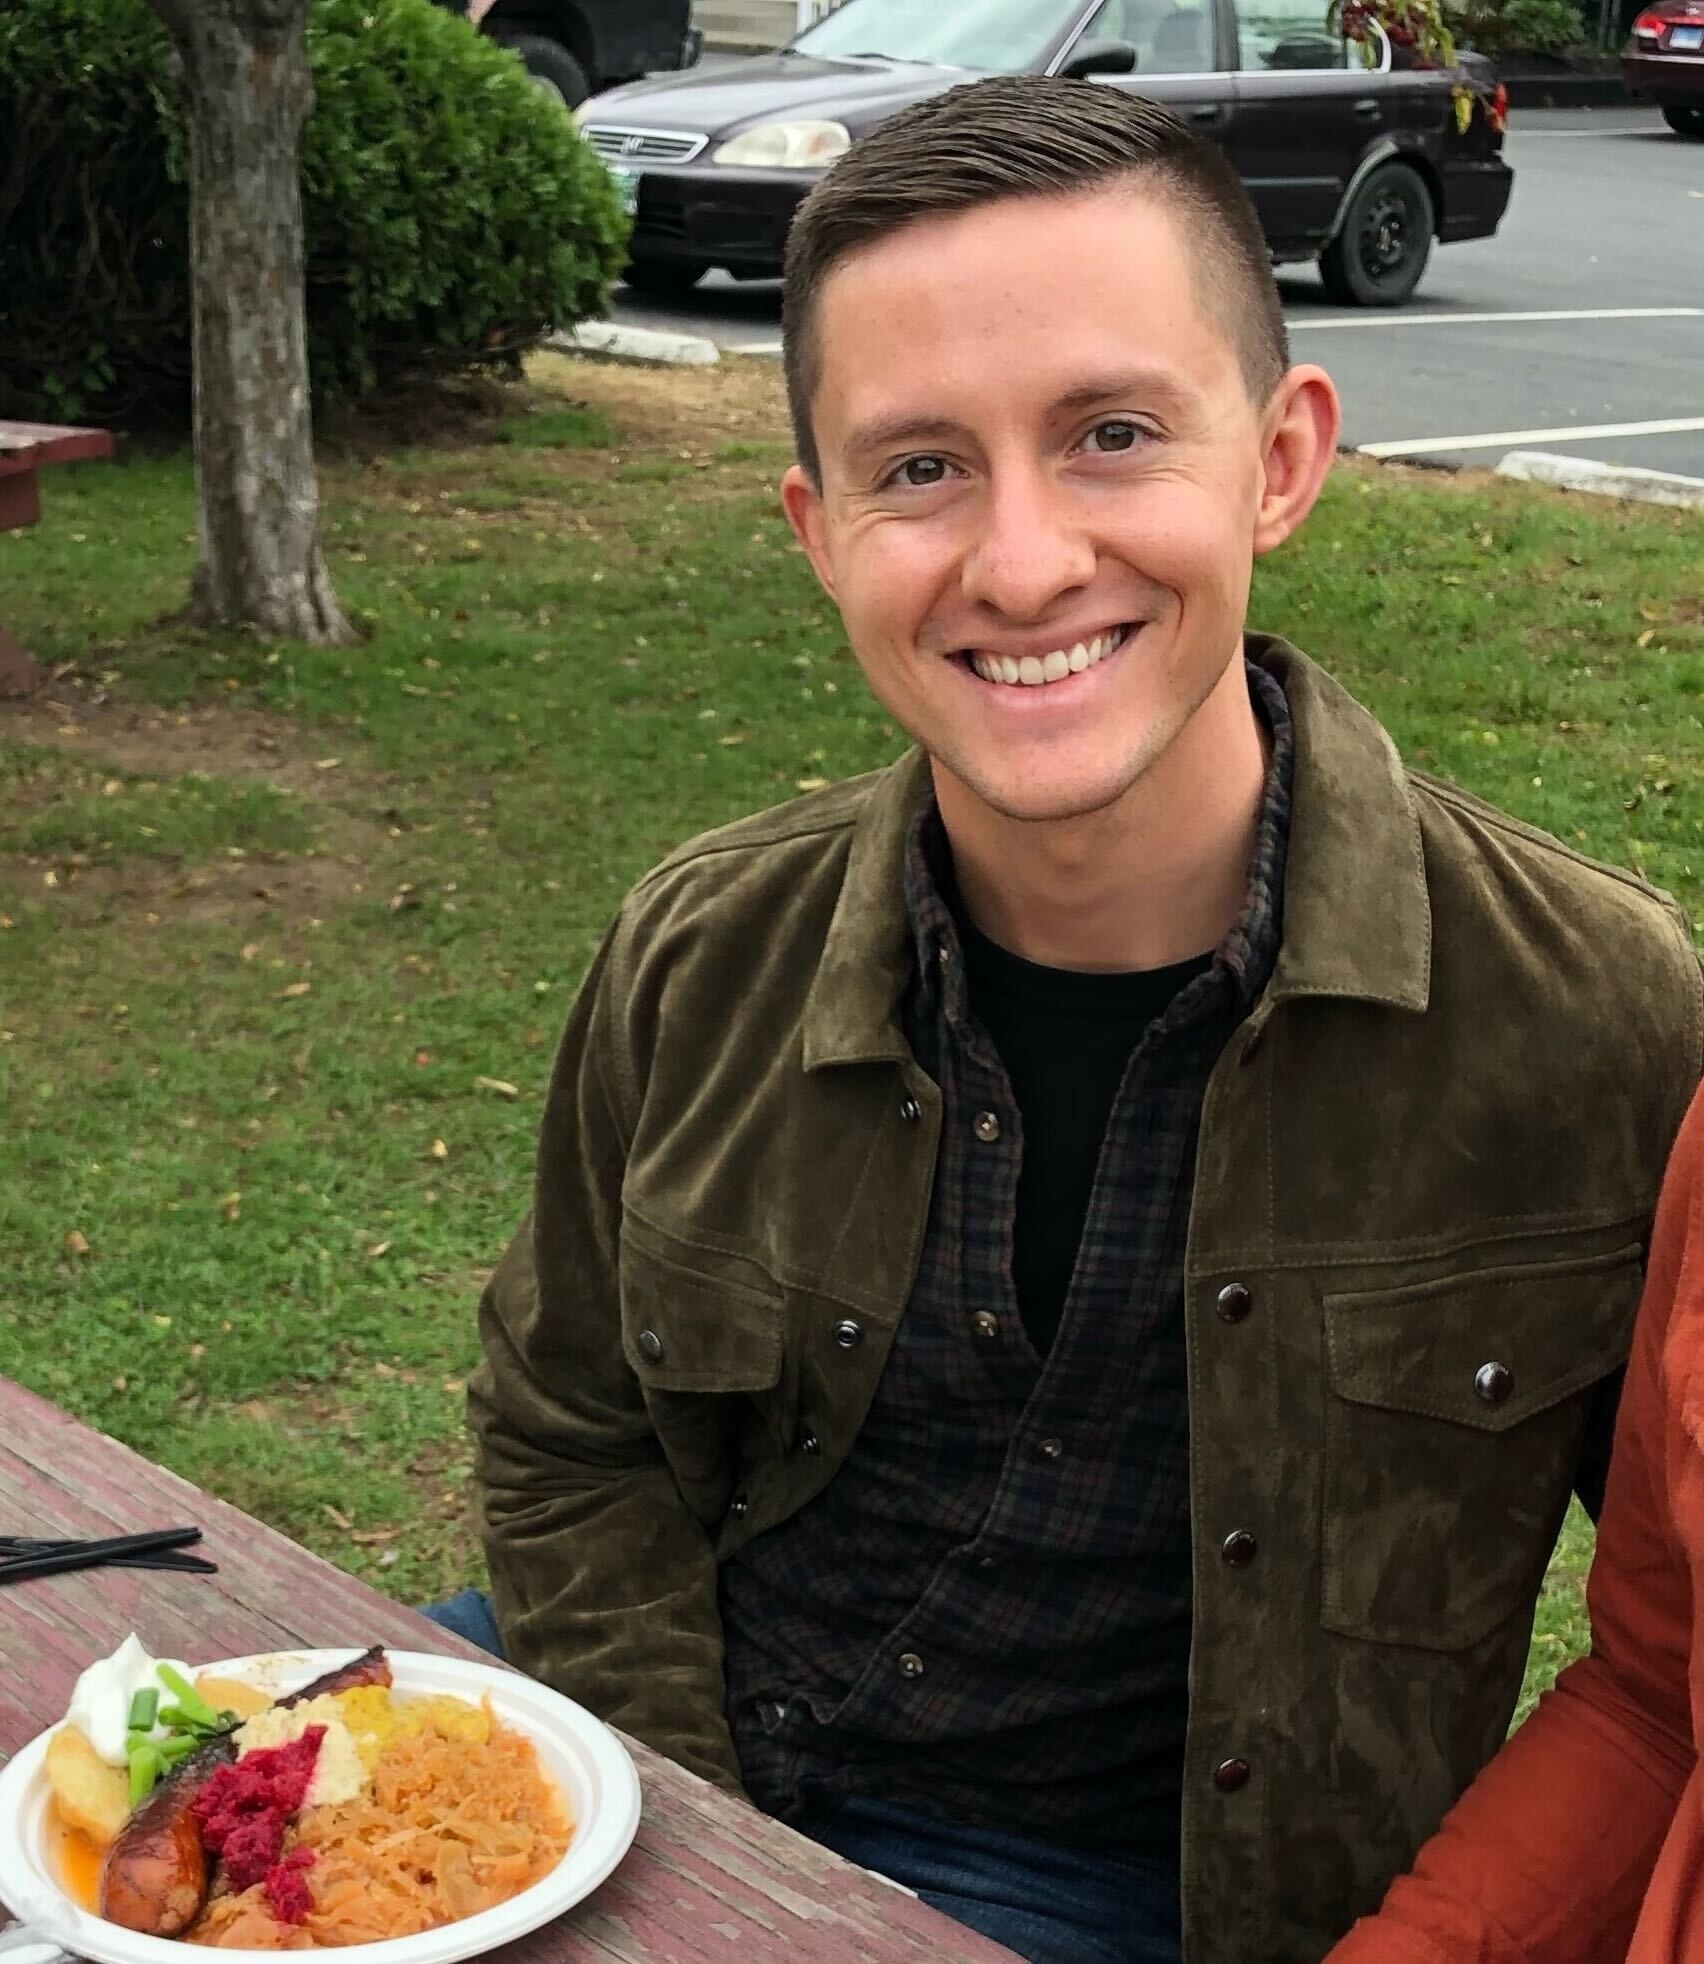 A smiling man sits outside at a table with a plate of food in front of him